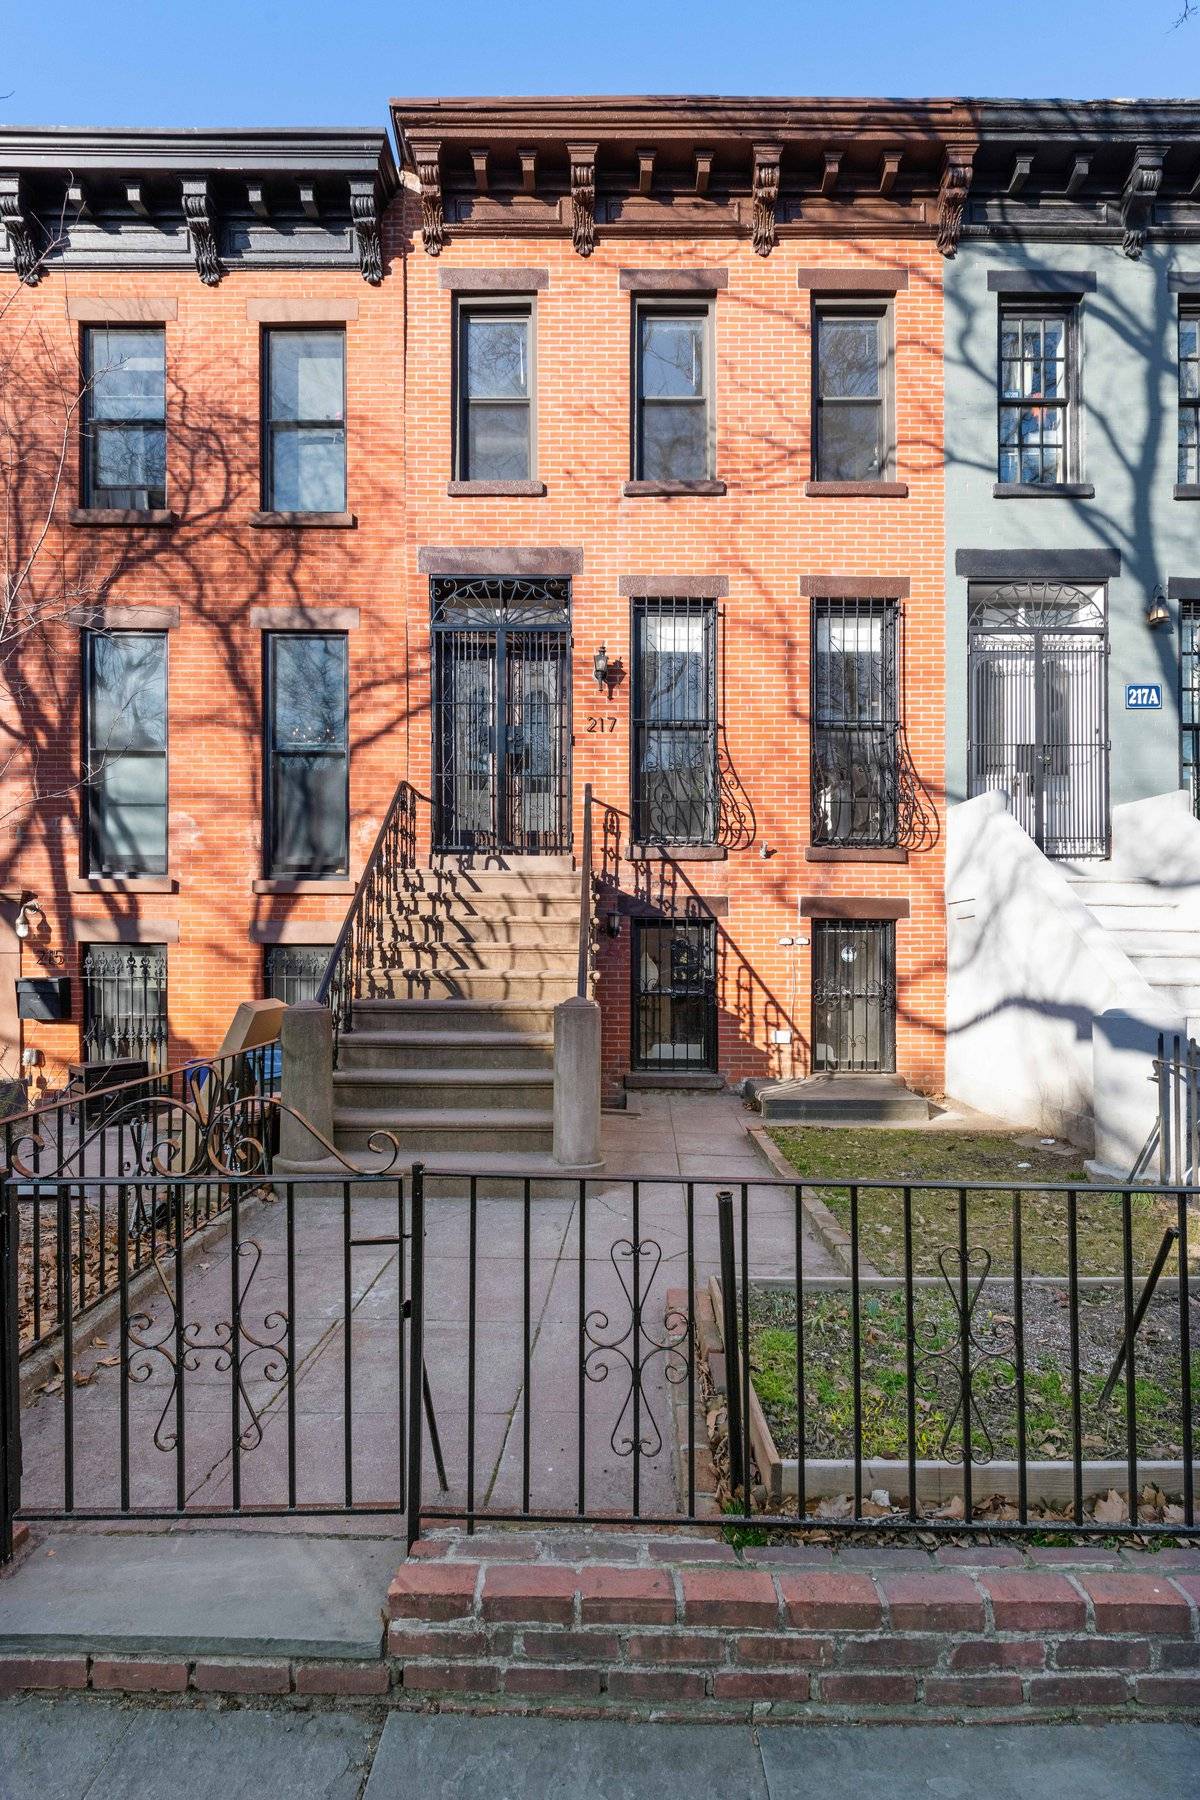 Located in the heart of trendy Boerum Hill, this legal 2 family house is currently configured as two apartments.